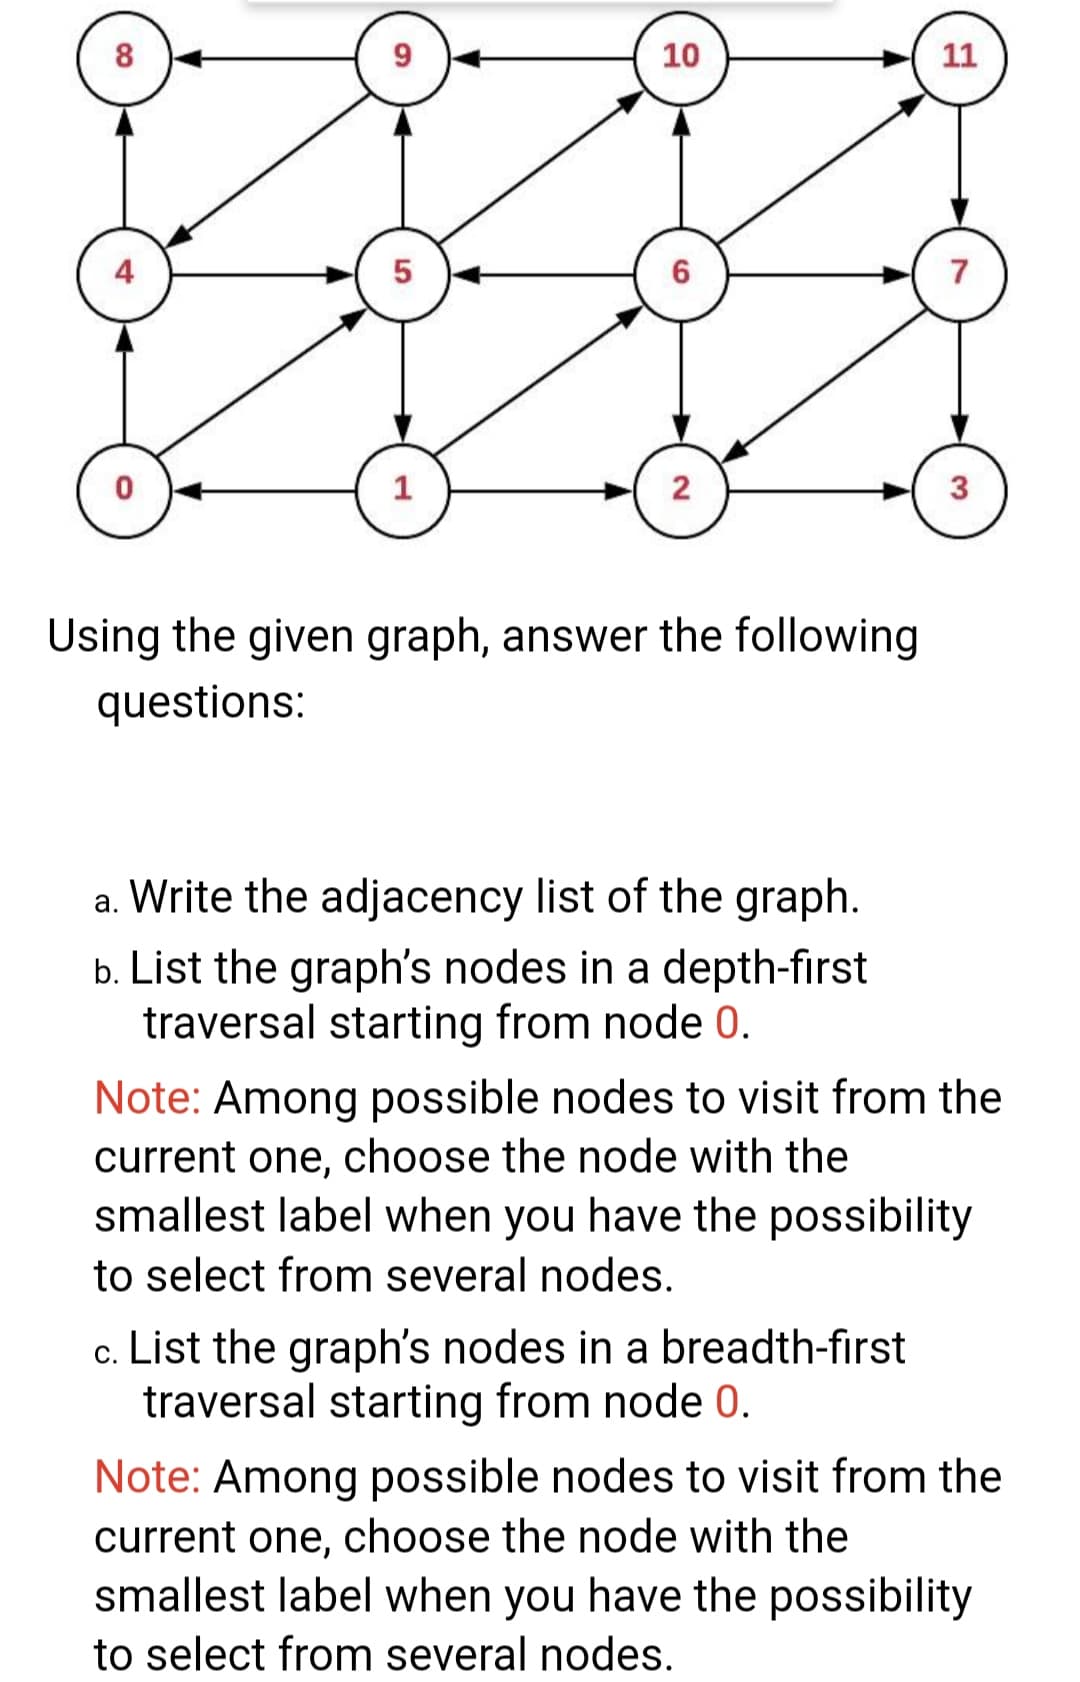 8
10
11
4
2
3
Using the given graph, answer the following
questions:
a. Write the adjacency list of the graph.
b. List the graph's nodes in a depth-first
traversal starting from node 0.
Note: Among possible nodes to visit from the
current one, choose the node with the
smallest label when you have the possibility
to select from several nodes.
c. List the graph's nodes in a breadth-first
traversal starting from node 0.
Note: Among possible nodes to visit from the
current one, choose the node with the
smallest label when you have the possibility
to select from several nodes.
5
